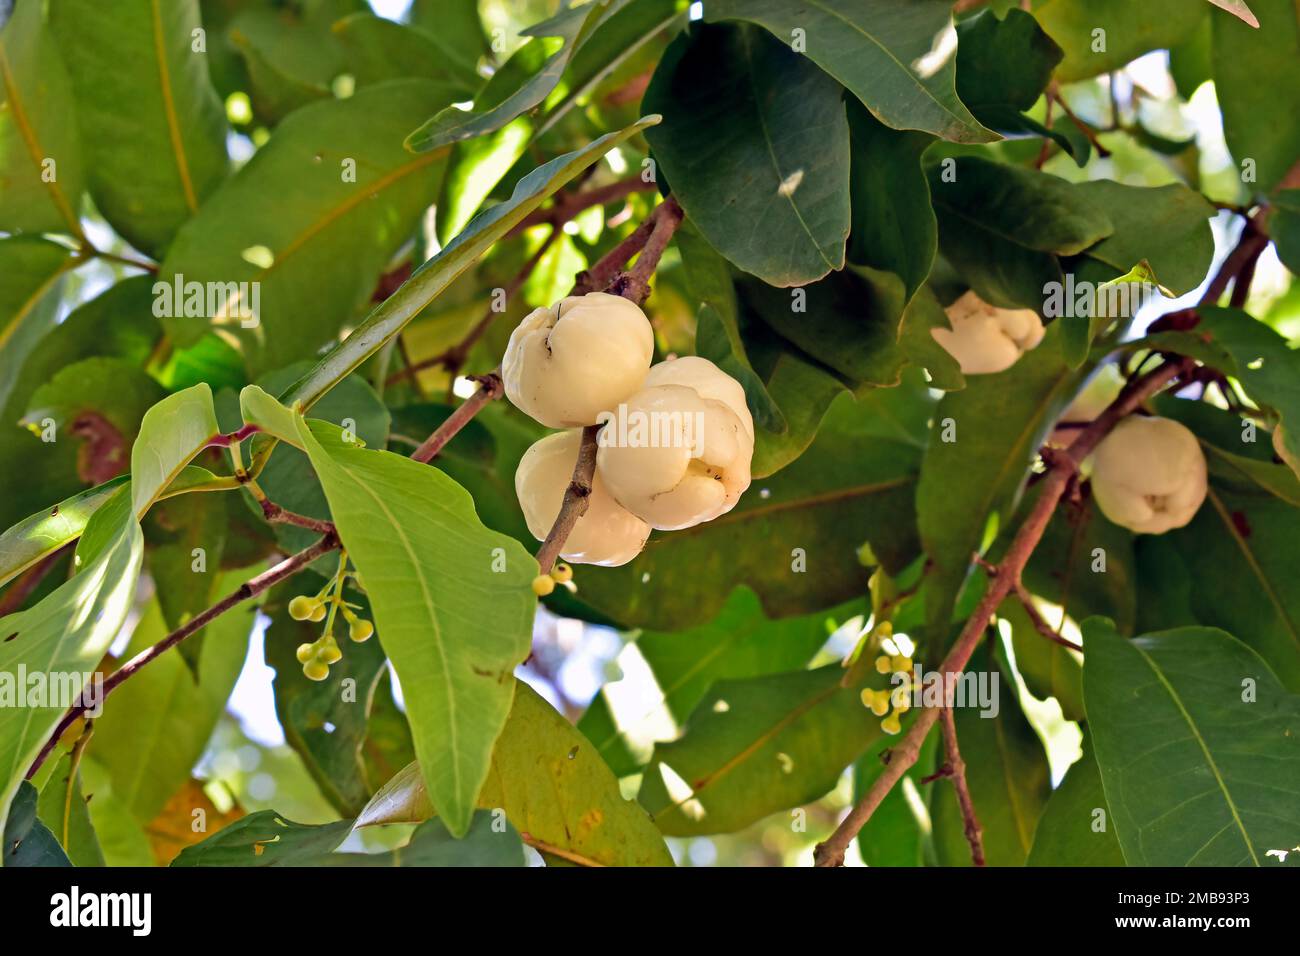 Watery rose apple, water apple or bell fruits (Syzygium aqueum) on tree in Rio de Janeiro Stock Photo